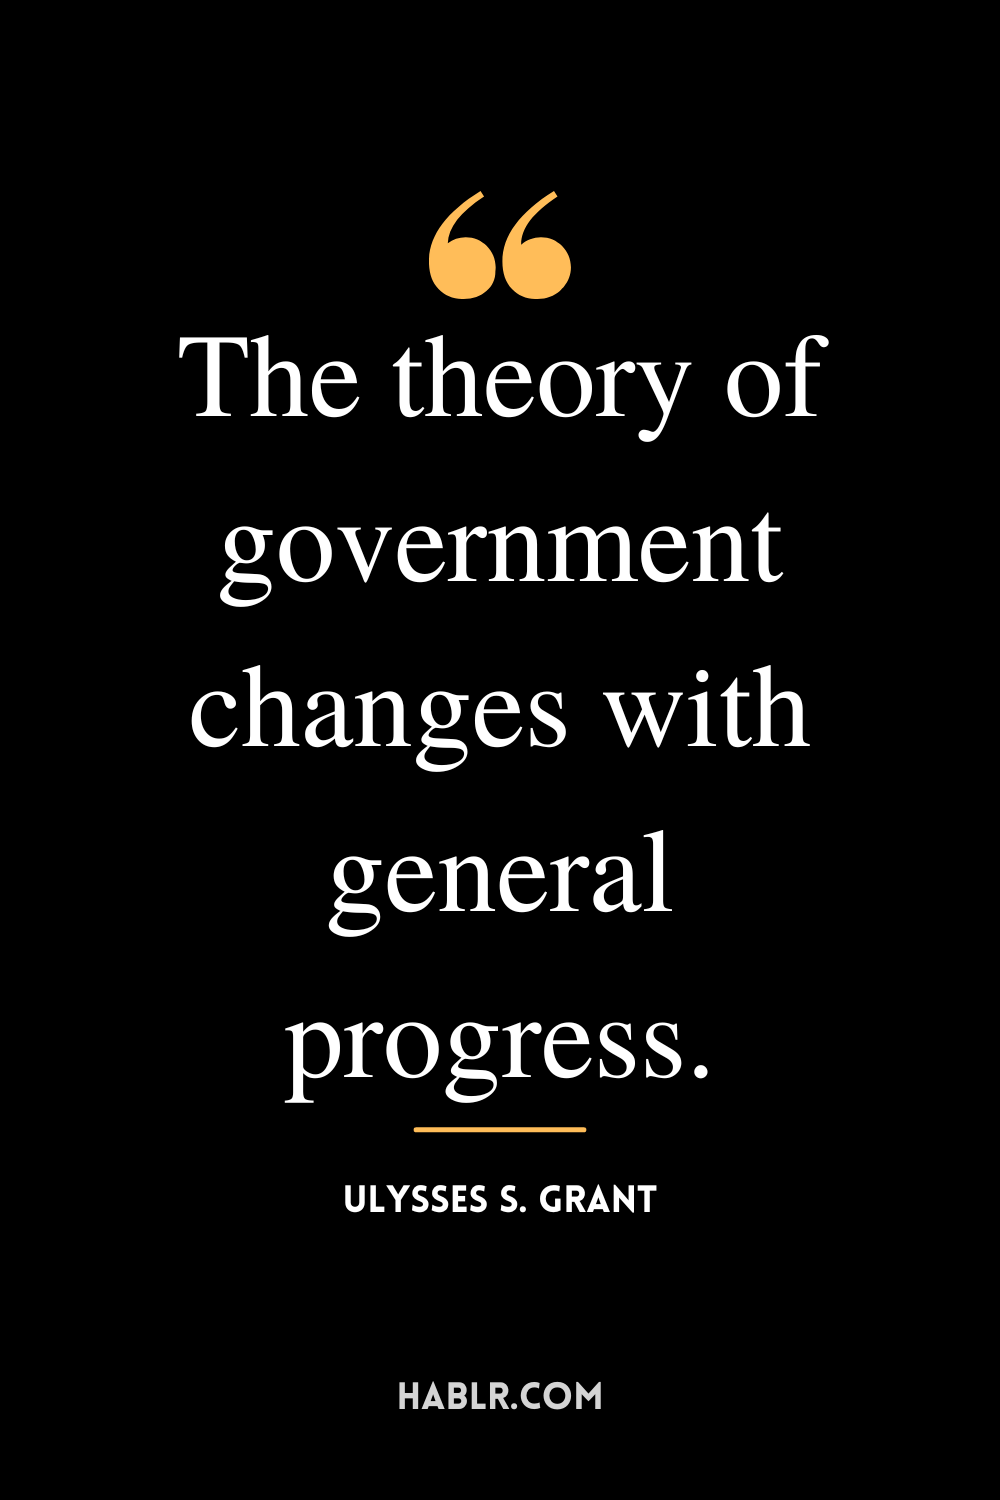 “The theory of government changes with general progress.” -Ulysses S. Grant